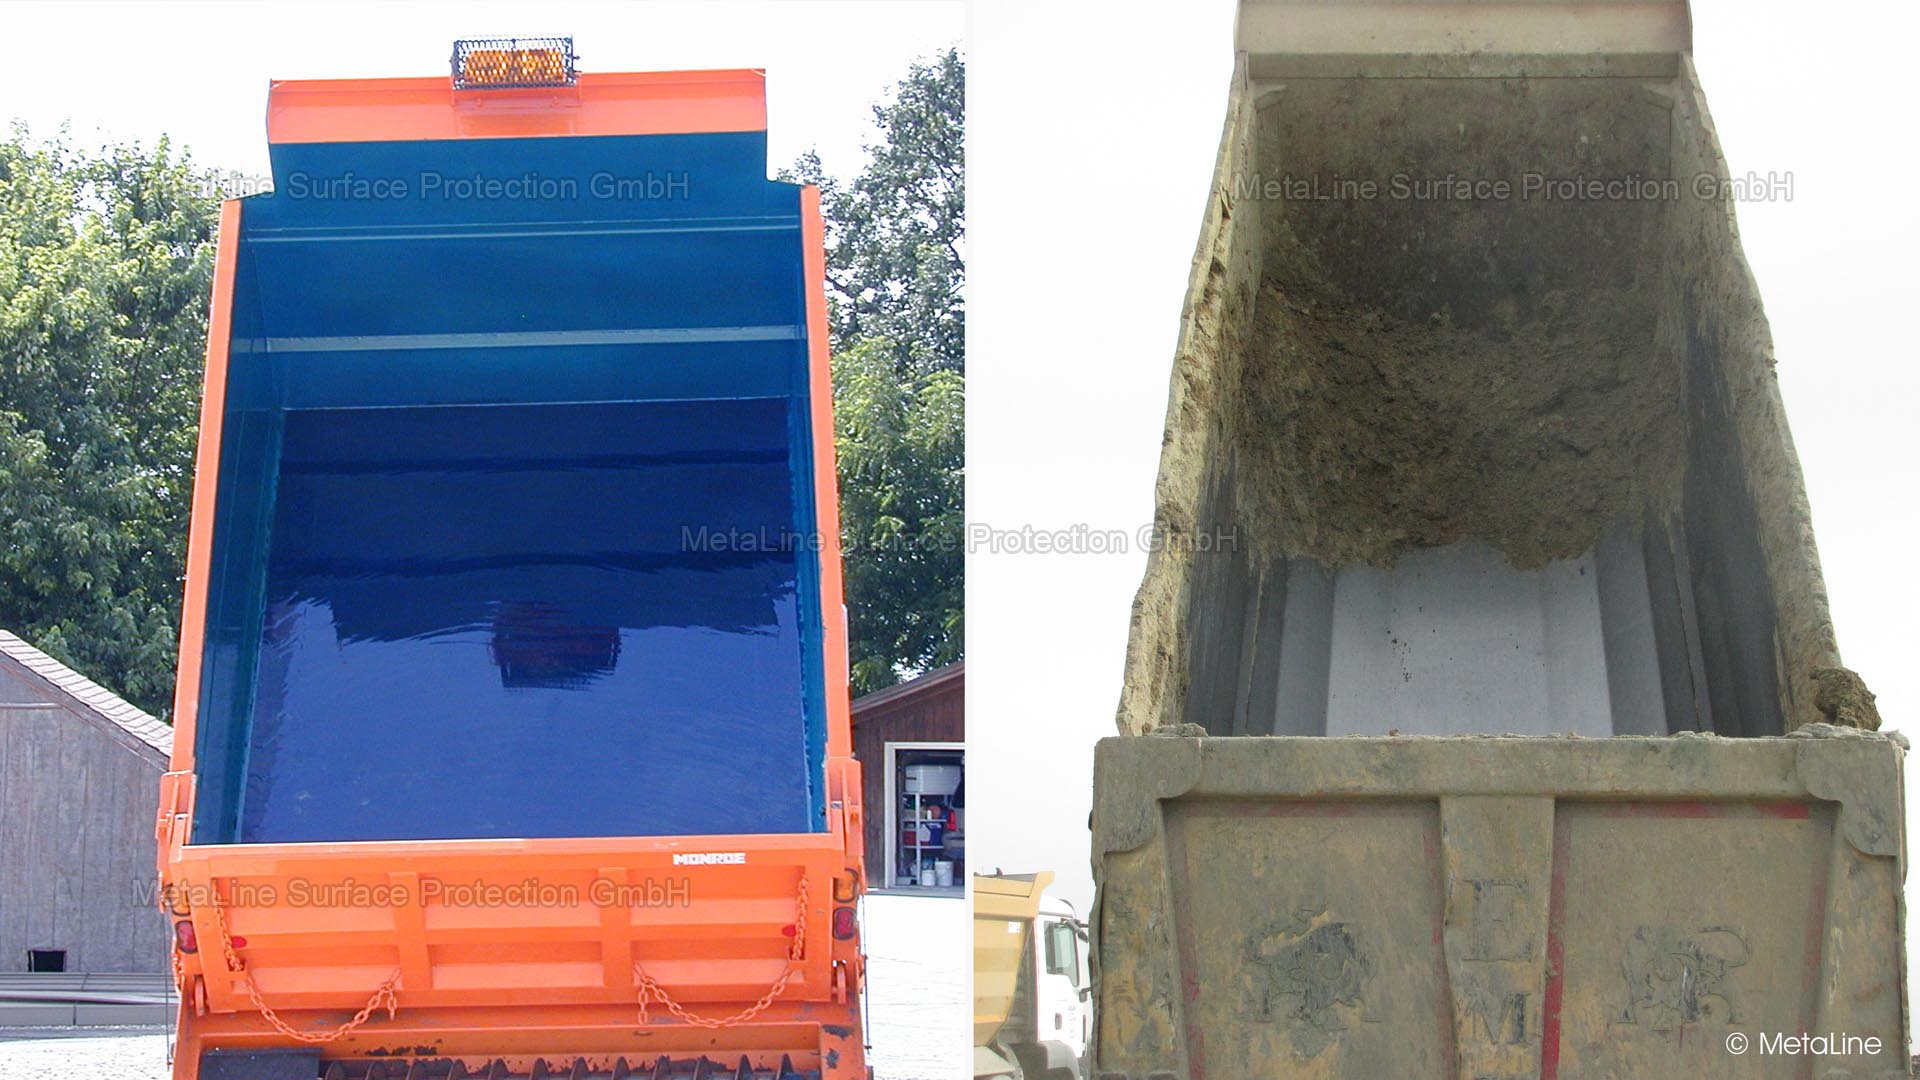 <!-- START: ConditionalContent --><!-- END: ConditionalContent -->   <!-- START: ConditionalContent --> Truck; Lining; Coating; Seamless; Spray; PU; Load-bearing; Food safe; Anti-slip; Waterproof; Elastic; Can be cleaned; Loading area; Anti-stick; Flatbed; Impact resistant; Dumper; Dump truck <!-- END: ConditionalContent -->   <!-- START: ConditionalContent --><!-- END: ConditionalContent -->   <!-- START: ConditionalContent --><!-- END: ConditionalContent -->